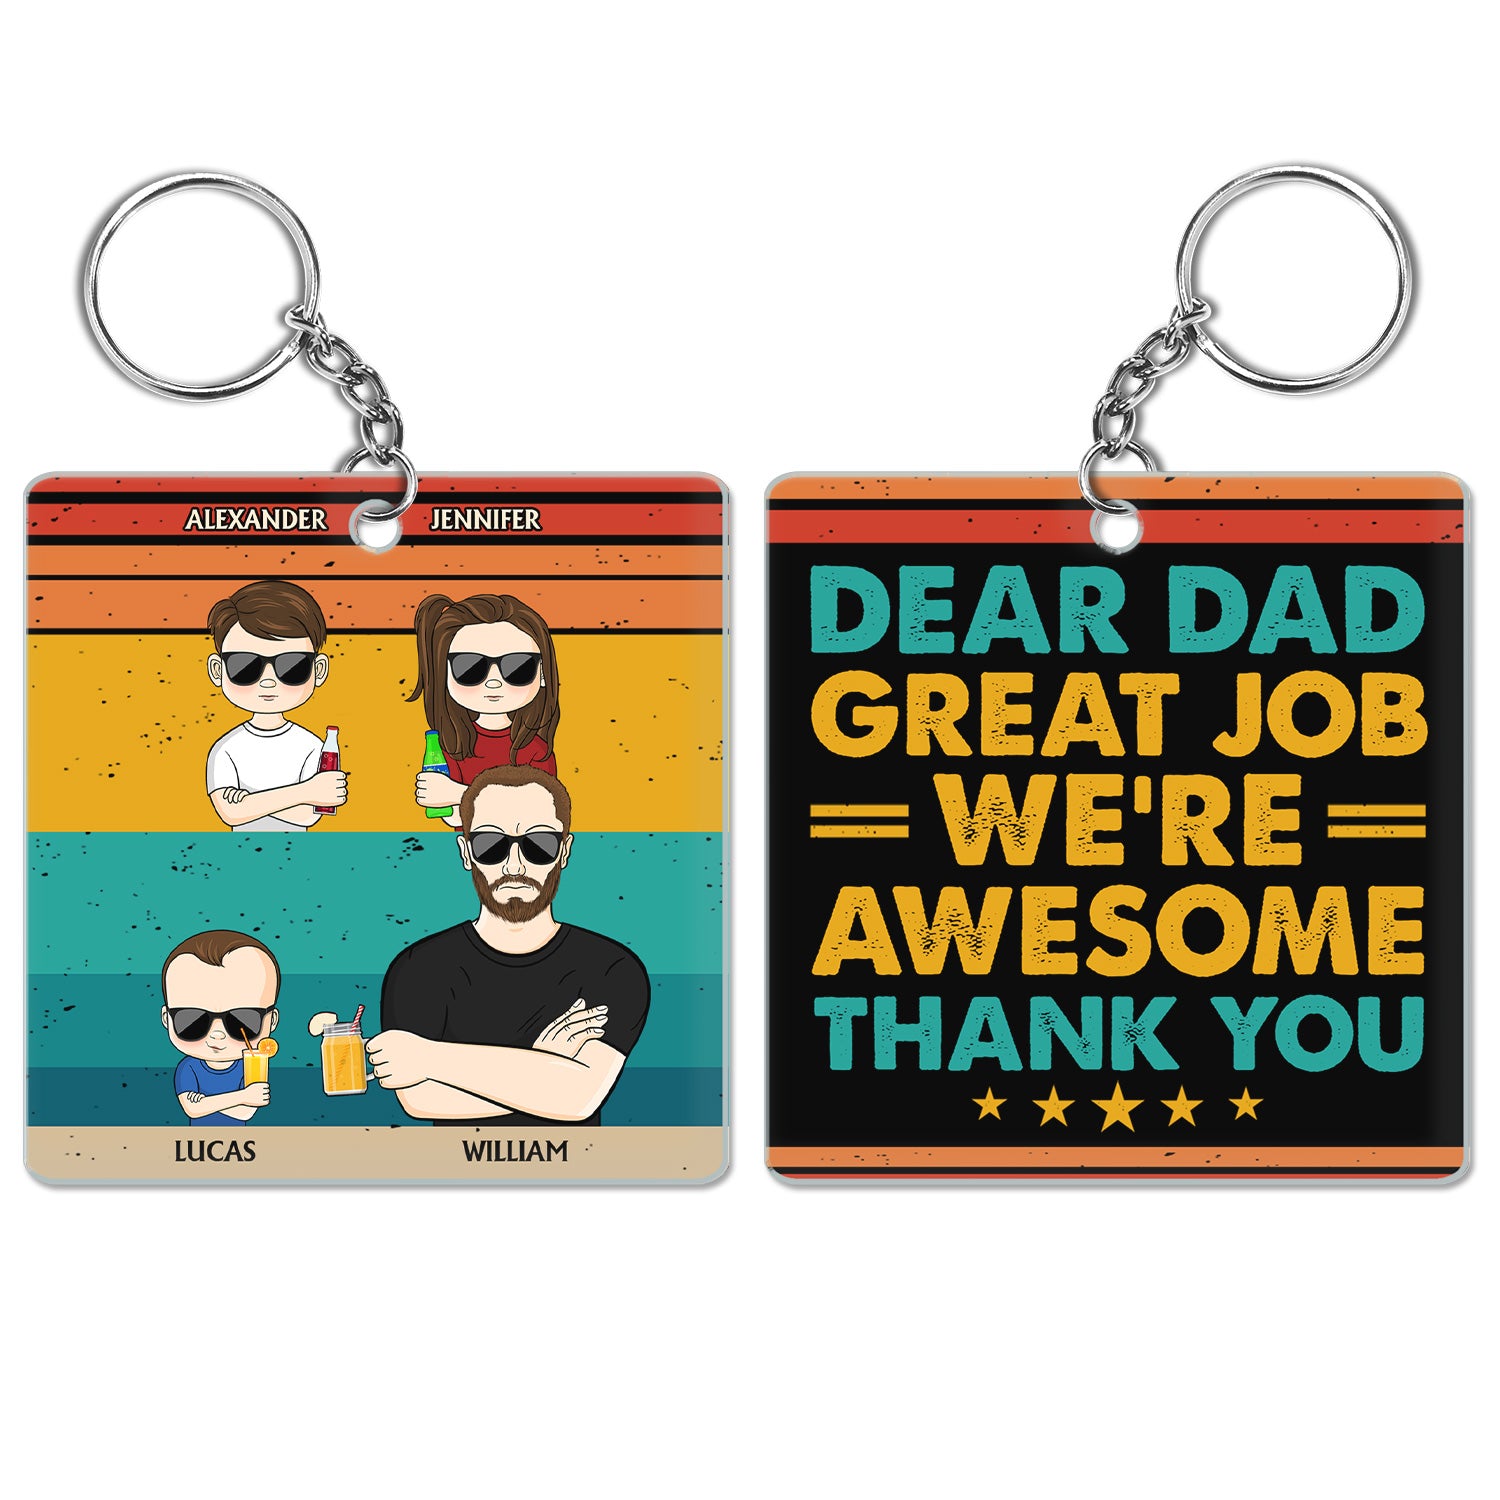 Dear Dad Great Job We're Awesome Thank You - Funny, Birthday Gift For Father, Husband - Personalized Custom Acrylic Keychain